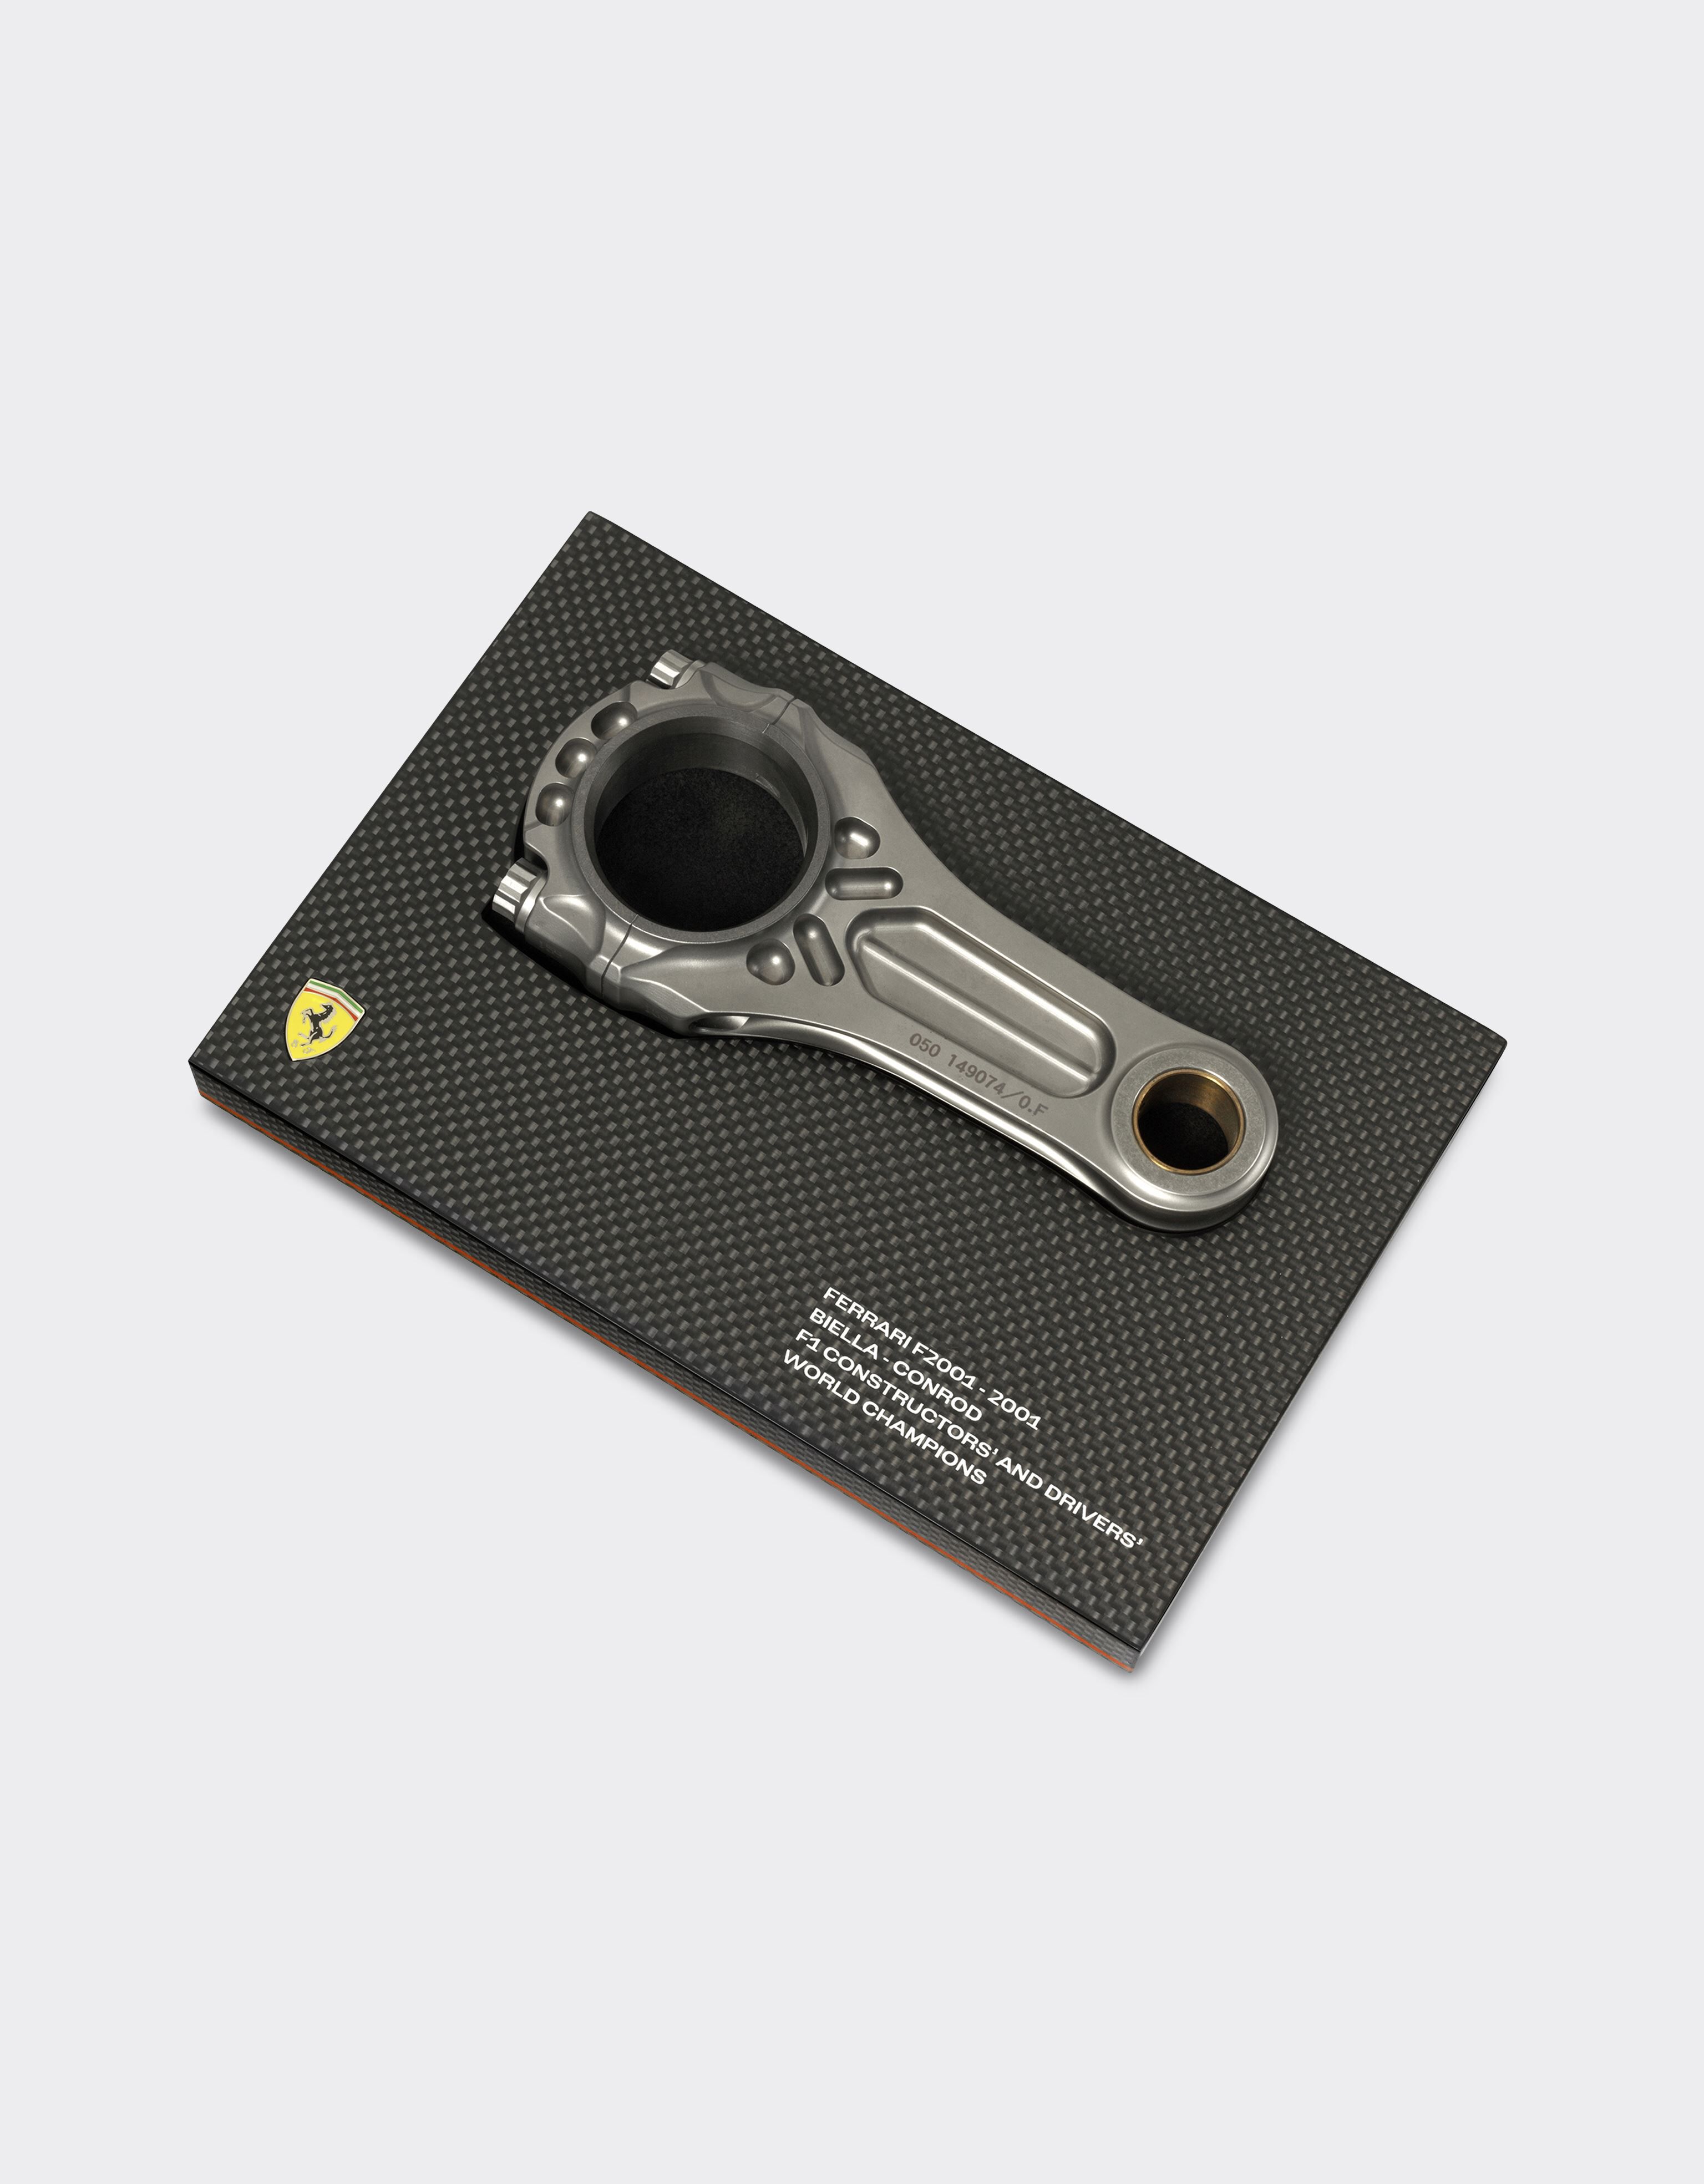 Ferrari Original connecting rod from the F2001, winner of the 2001 Constructors' and Drivers' Championships Black 47671f